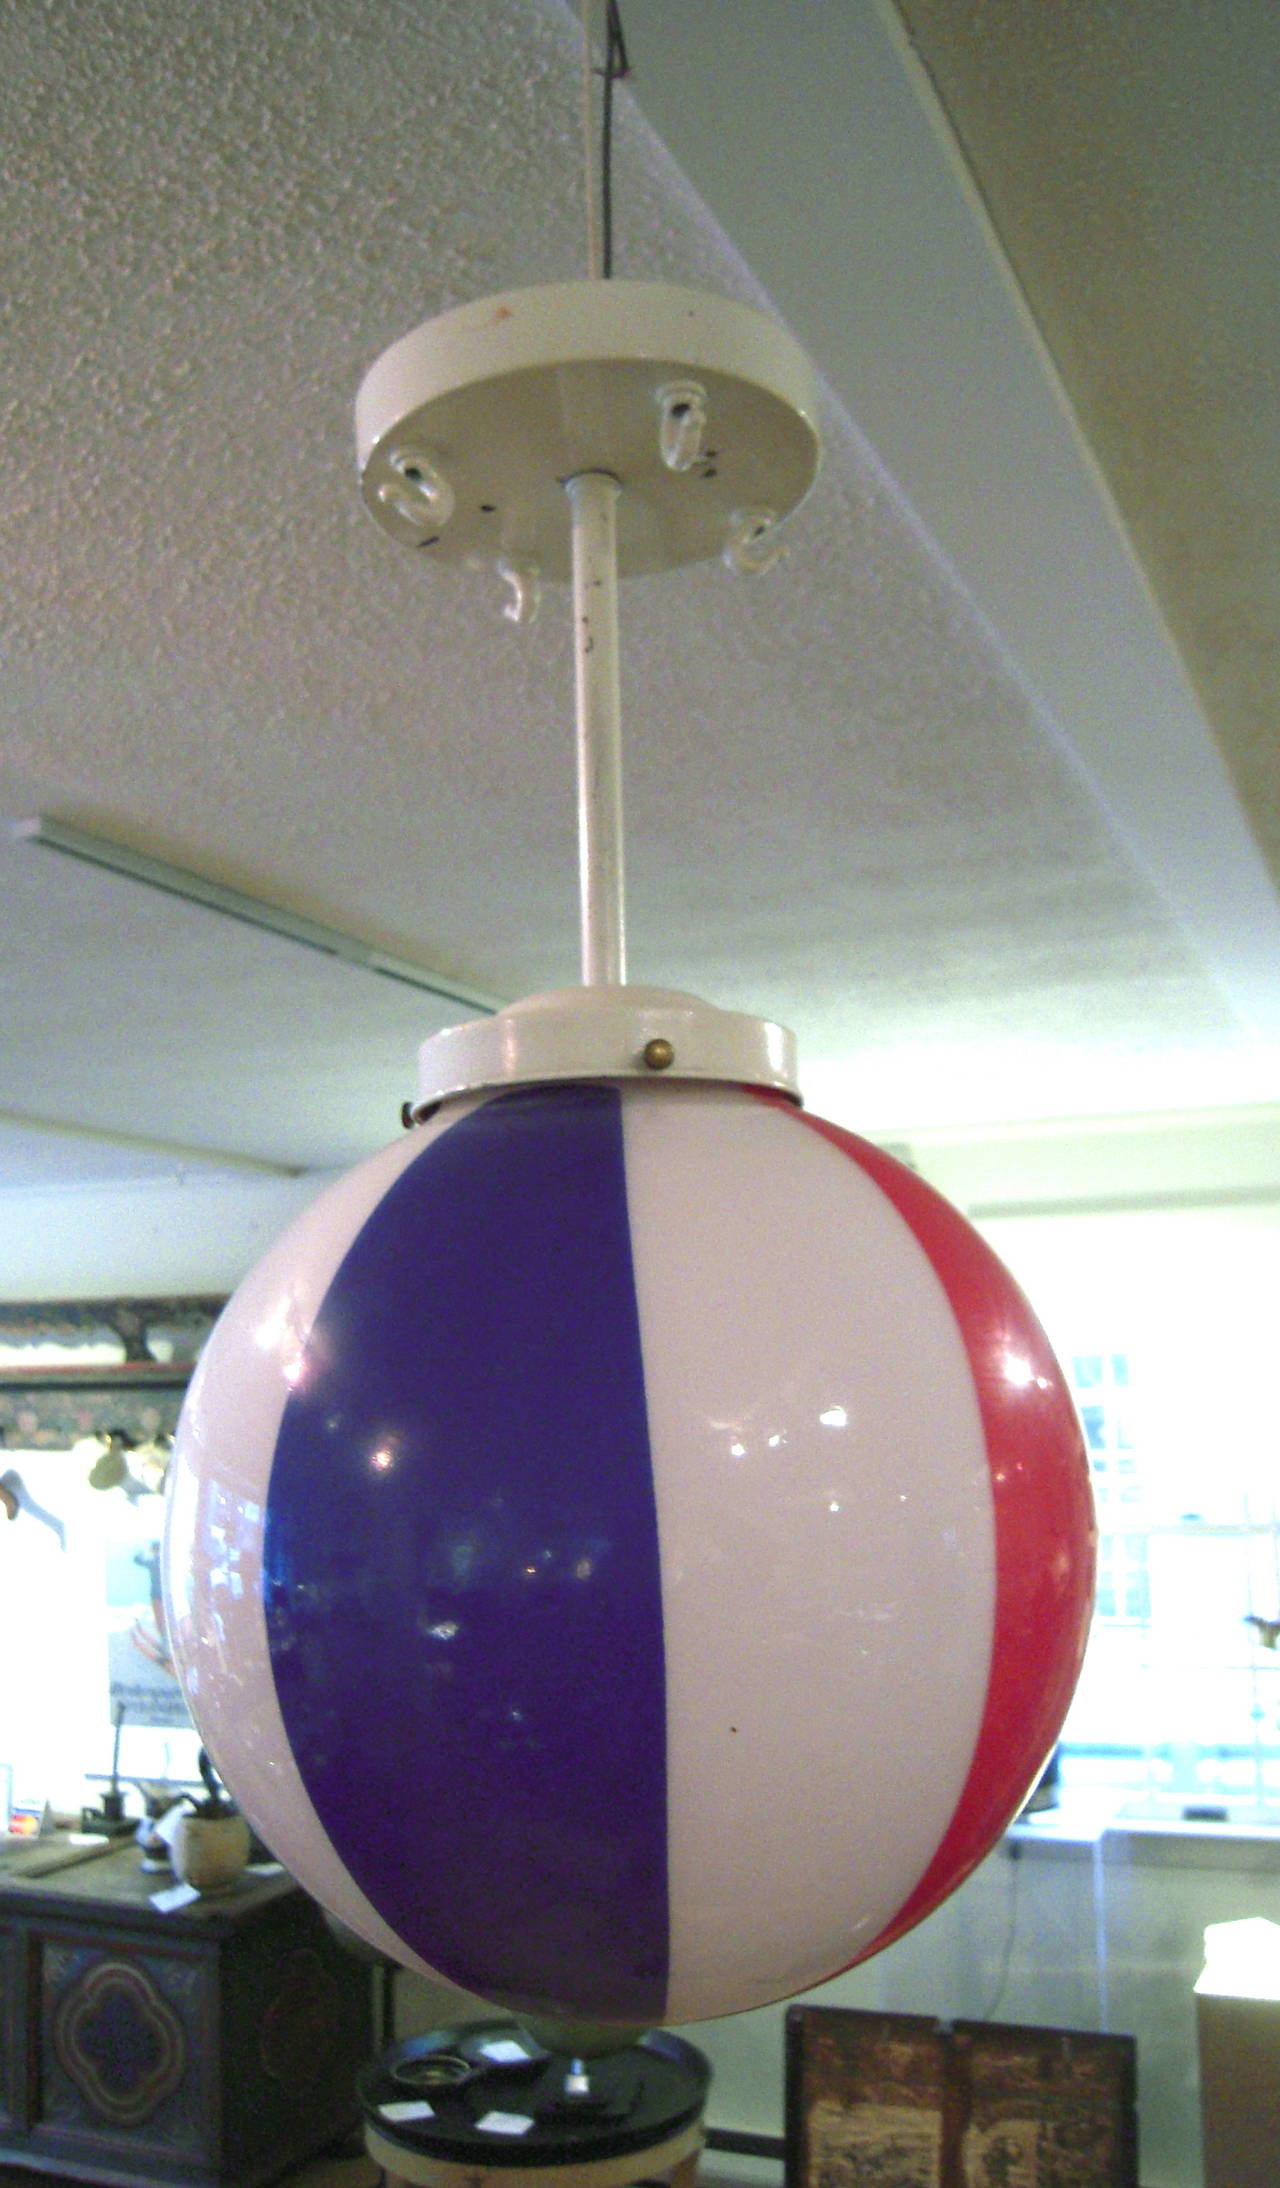 A graphic red, white and blue glass globe hanging light fixture, originally made for the American Basketball Association (ABA, 1967-1976), attached to a removable white-painted metal rod and ceiling canopy which has three hooks attached it